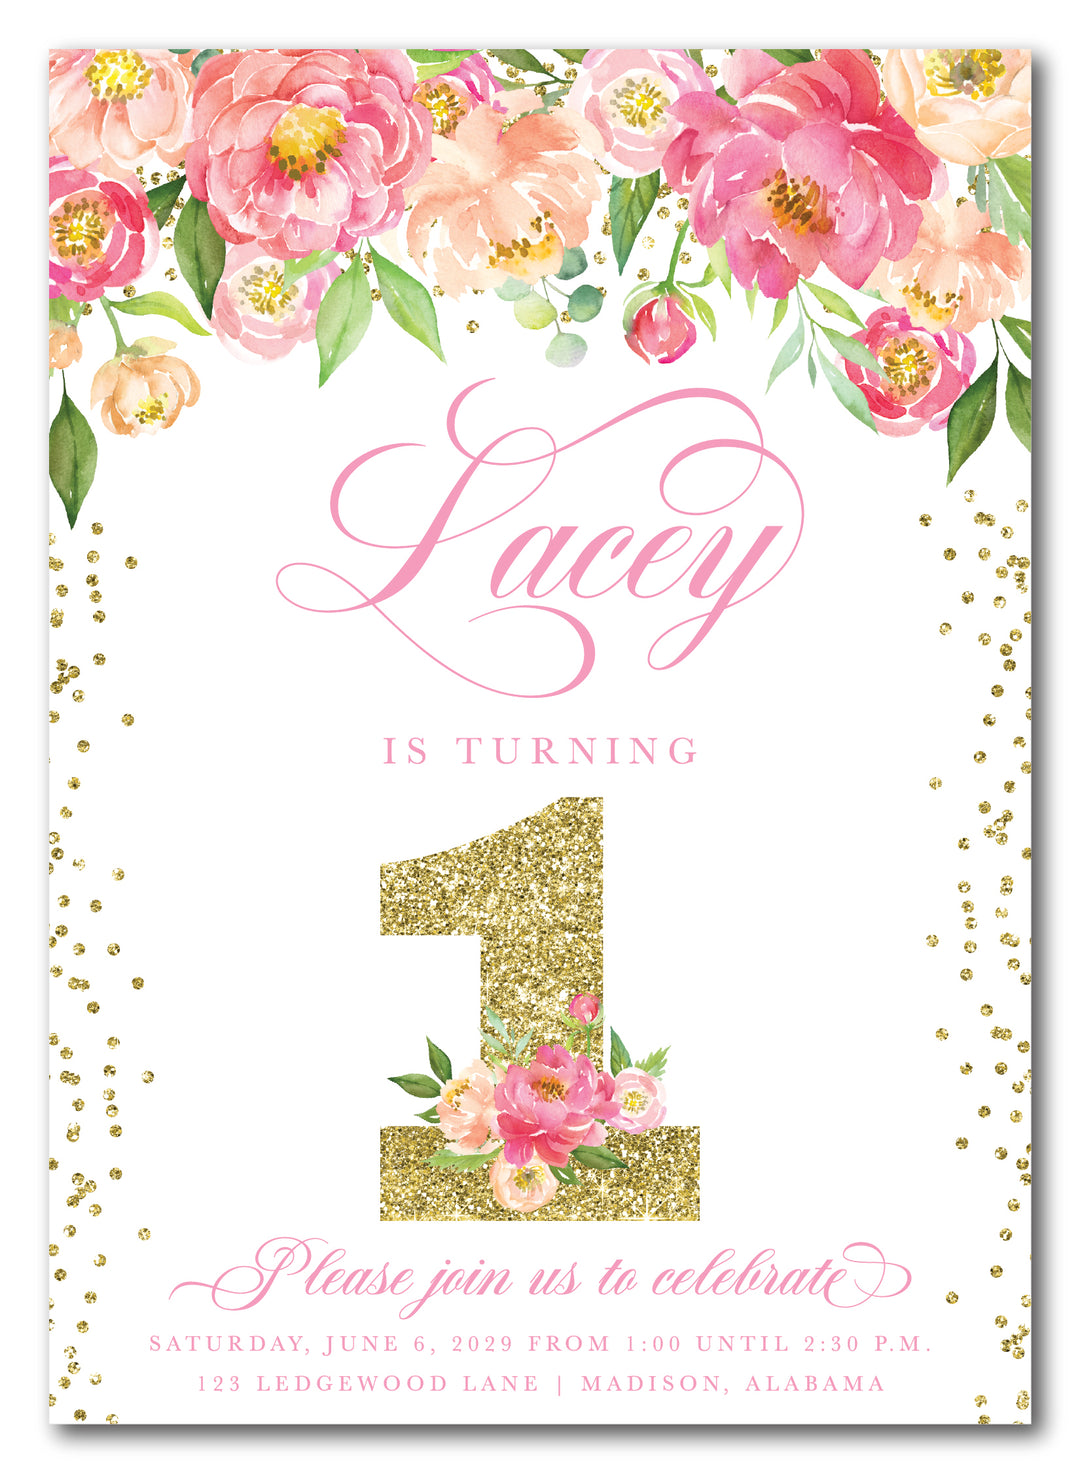 The Floral Birthday Party Invitation